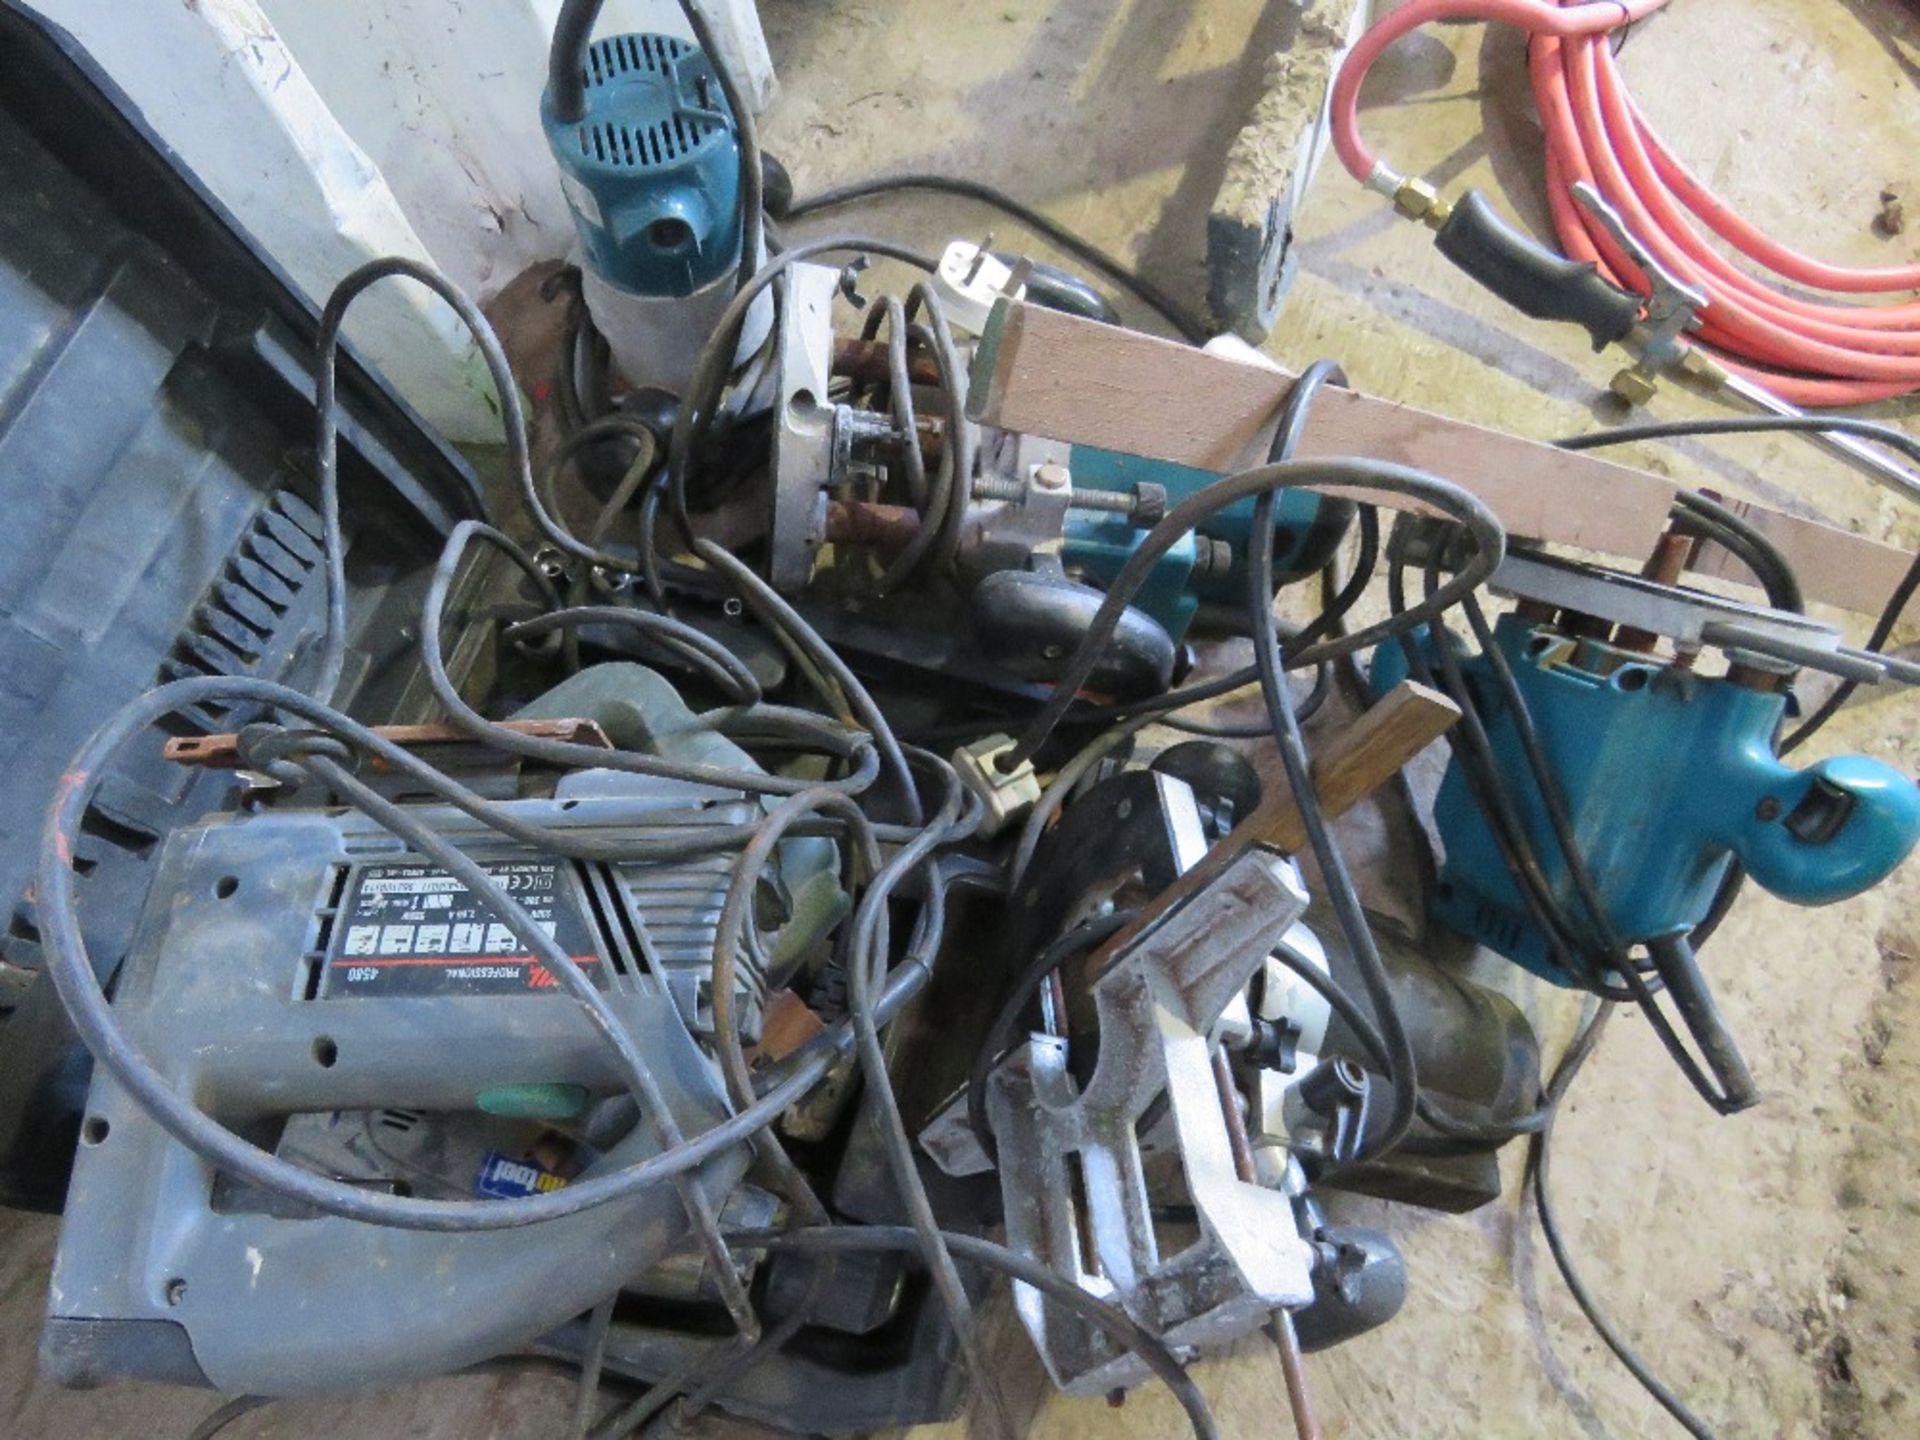 4 X ROUTERS, 2 X JIGSAWS PLUS A BATTERY DRILL. THIS LOT IS SOLD UNDER THE AUCTIONEERS MARGIN SCHE